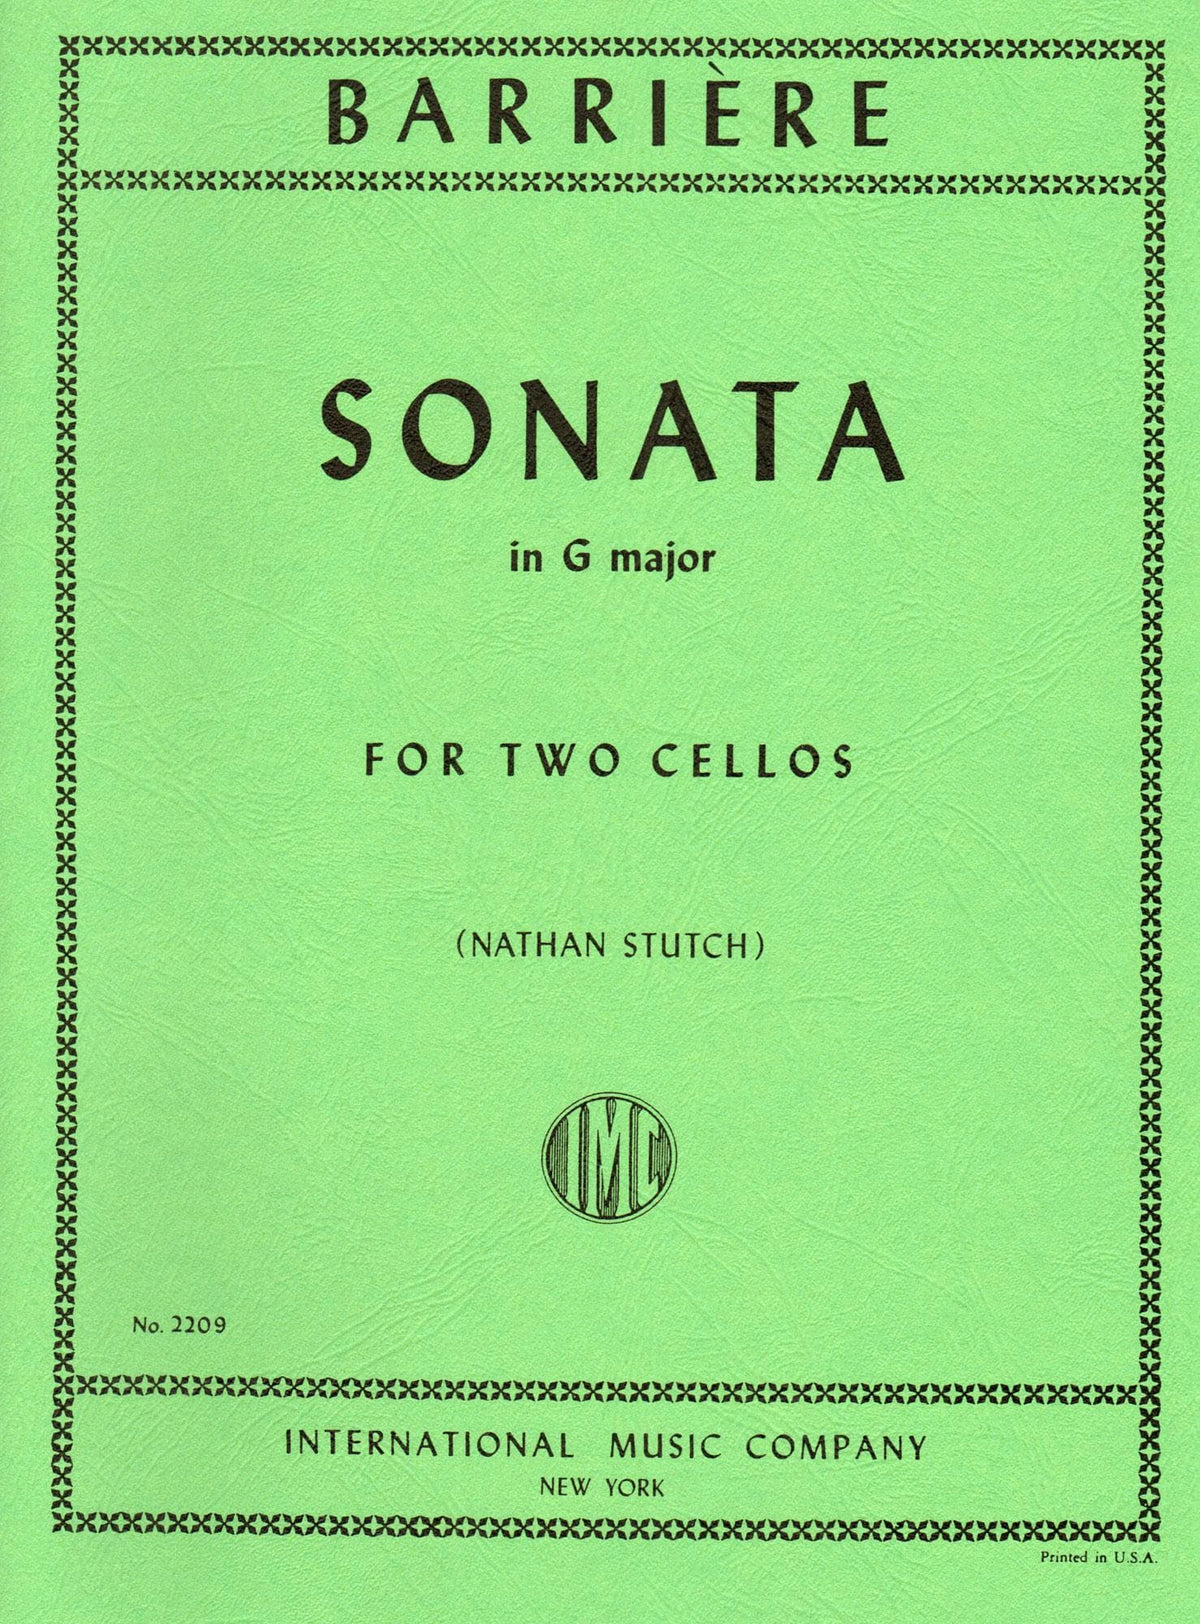 Barriere, J - Sonata In G Major for Two Cellos - Arranged by Stutch - International Edition